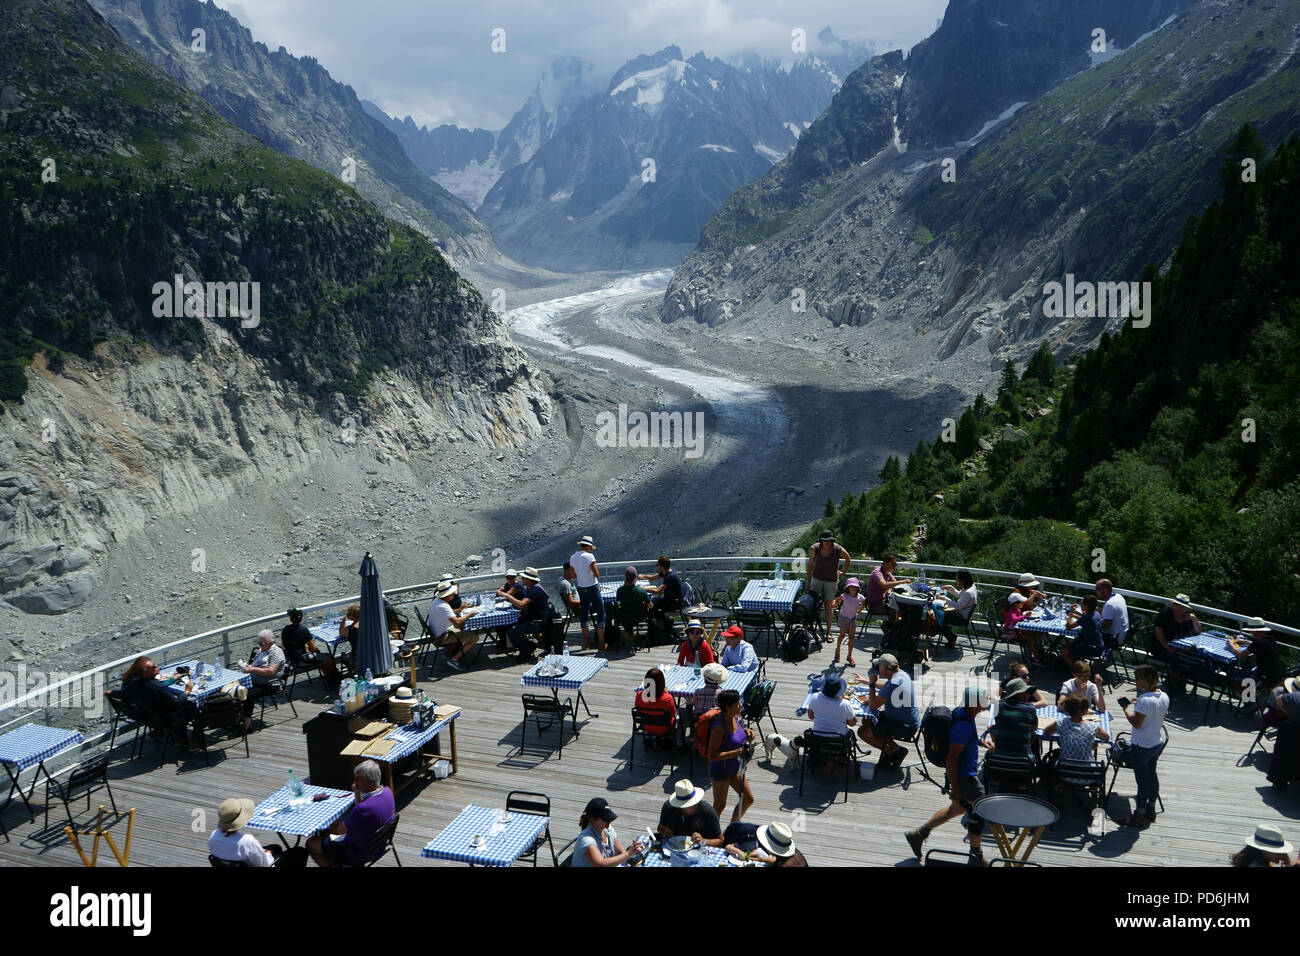 Tourists on terrasse of restaurant at Montenvers with view over La Mer de Glace, Mont blanc massiv, French alps, France Stock Photo